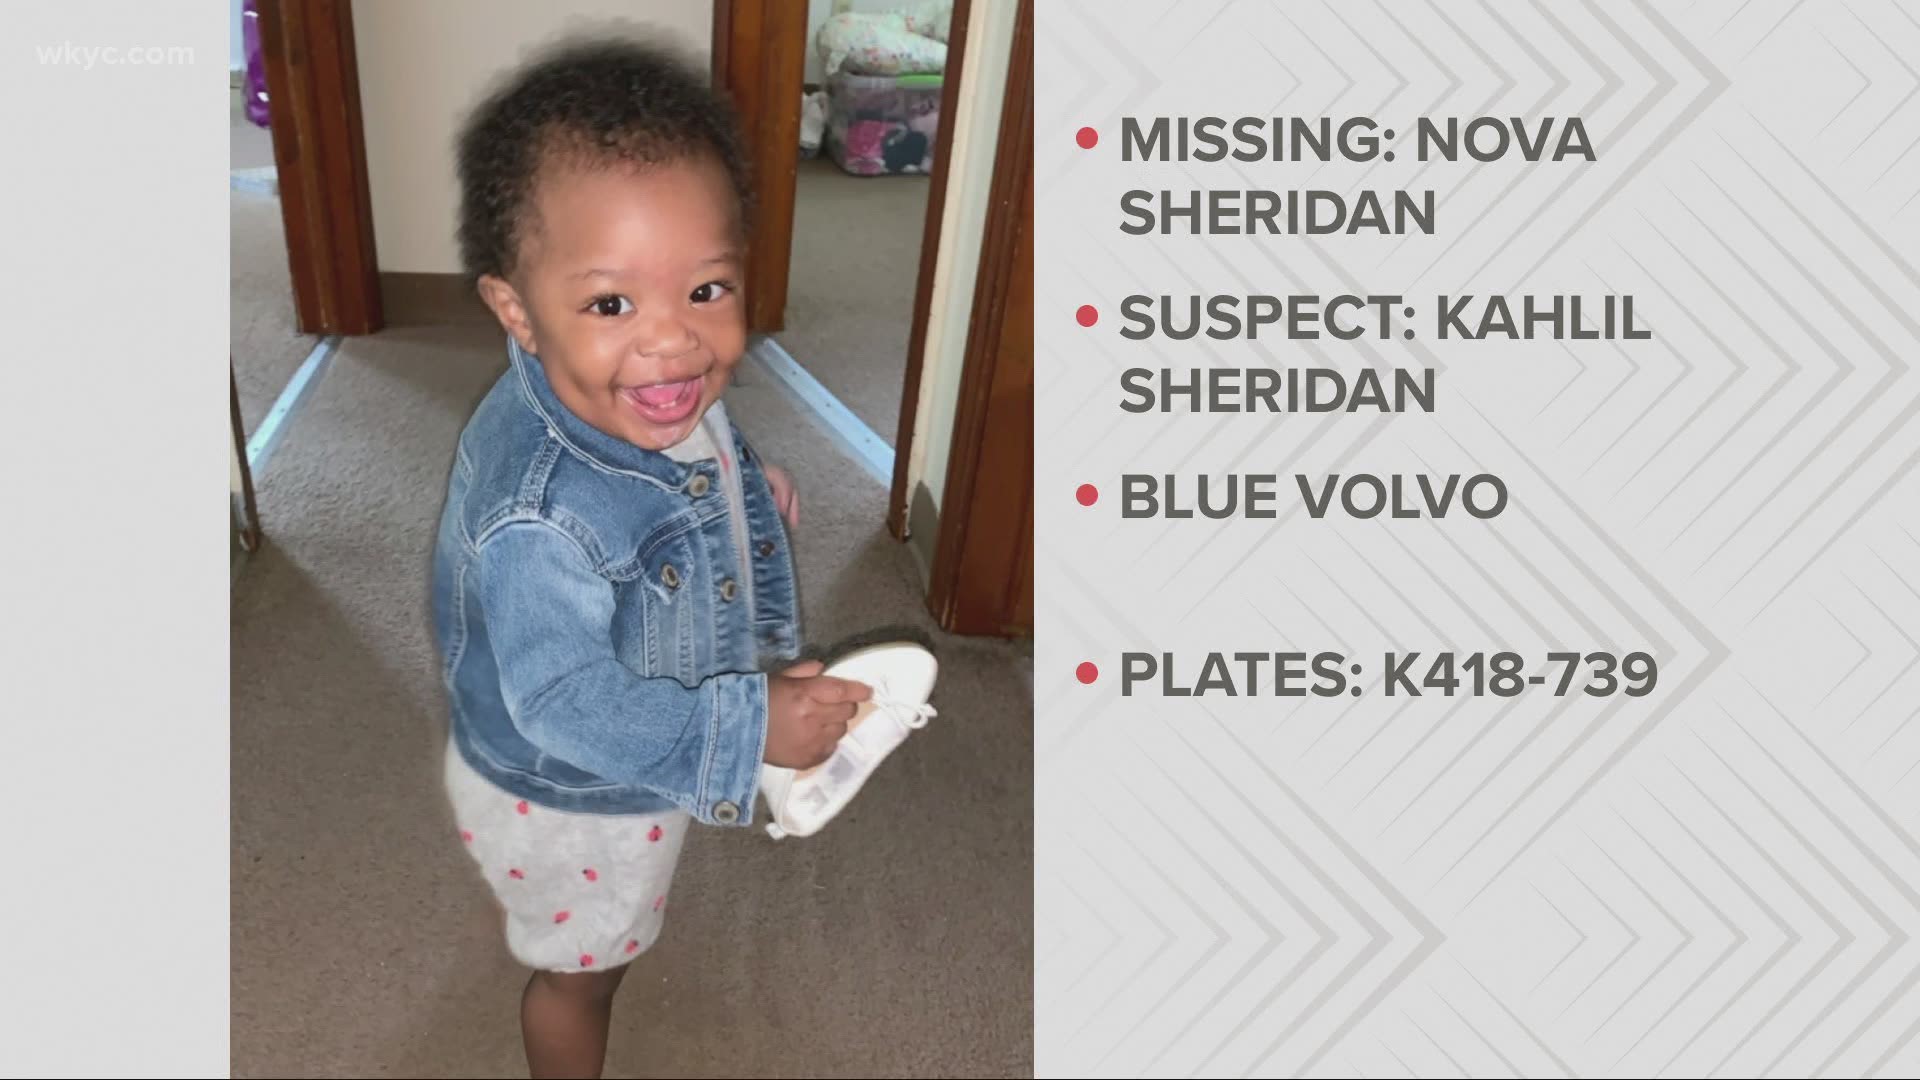 Amber Alert Issued For 1 Year Old Nova Sheridan In Youngstown 6952